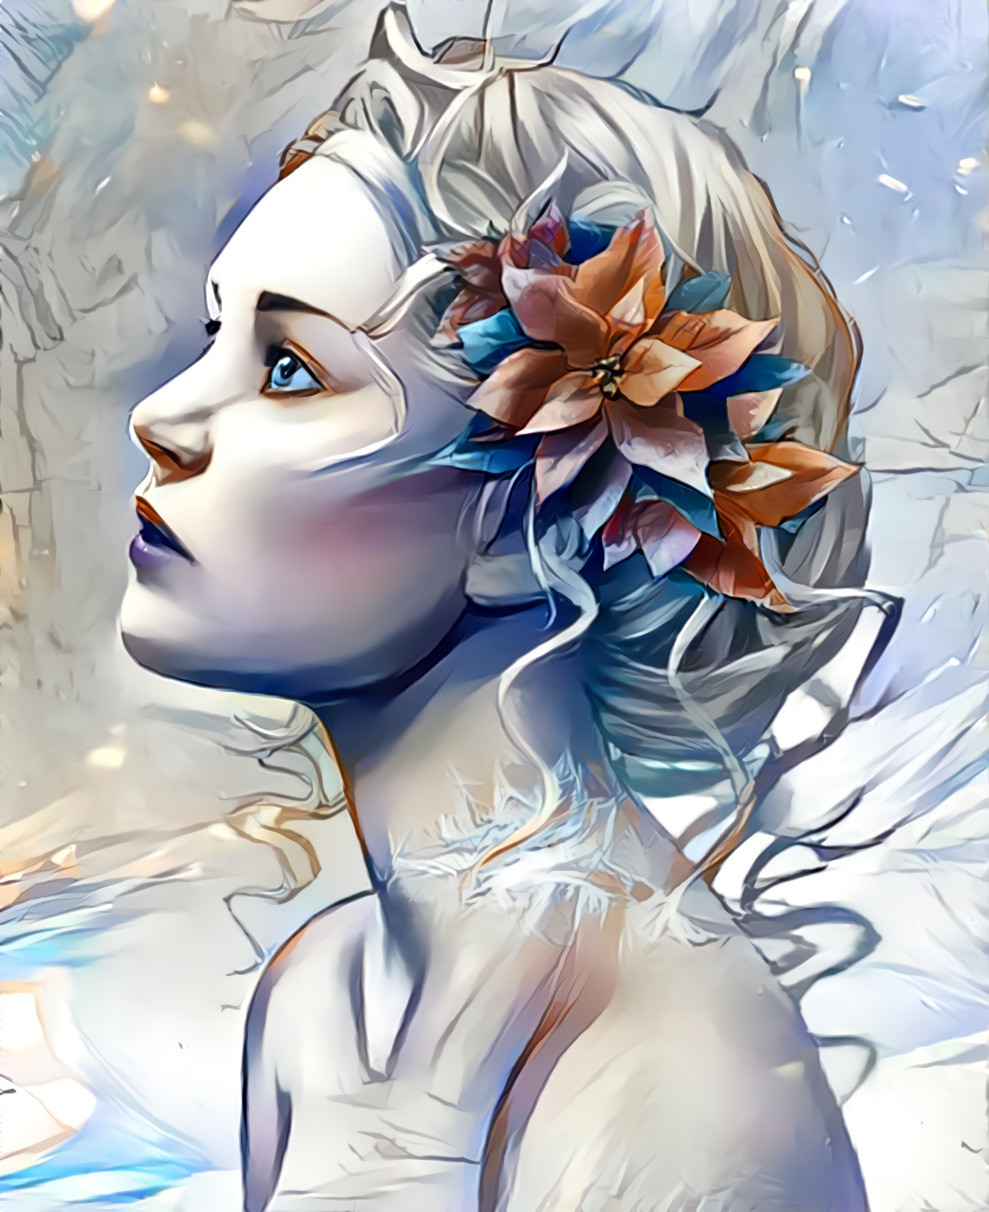 Her beautiful white skin was only matched by fire in her soul, like the poinsettia in her hair. She looked radiant in her lover’s eyes, surrendering to her romantic stare. ~DWH~ image art courtesy of Cris Ortega.